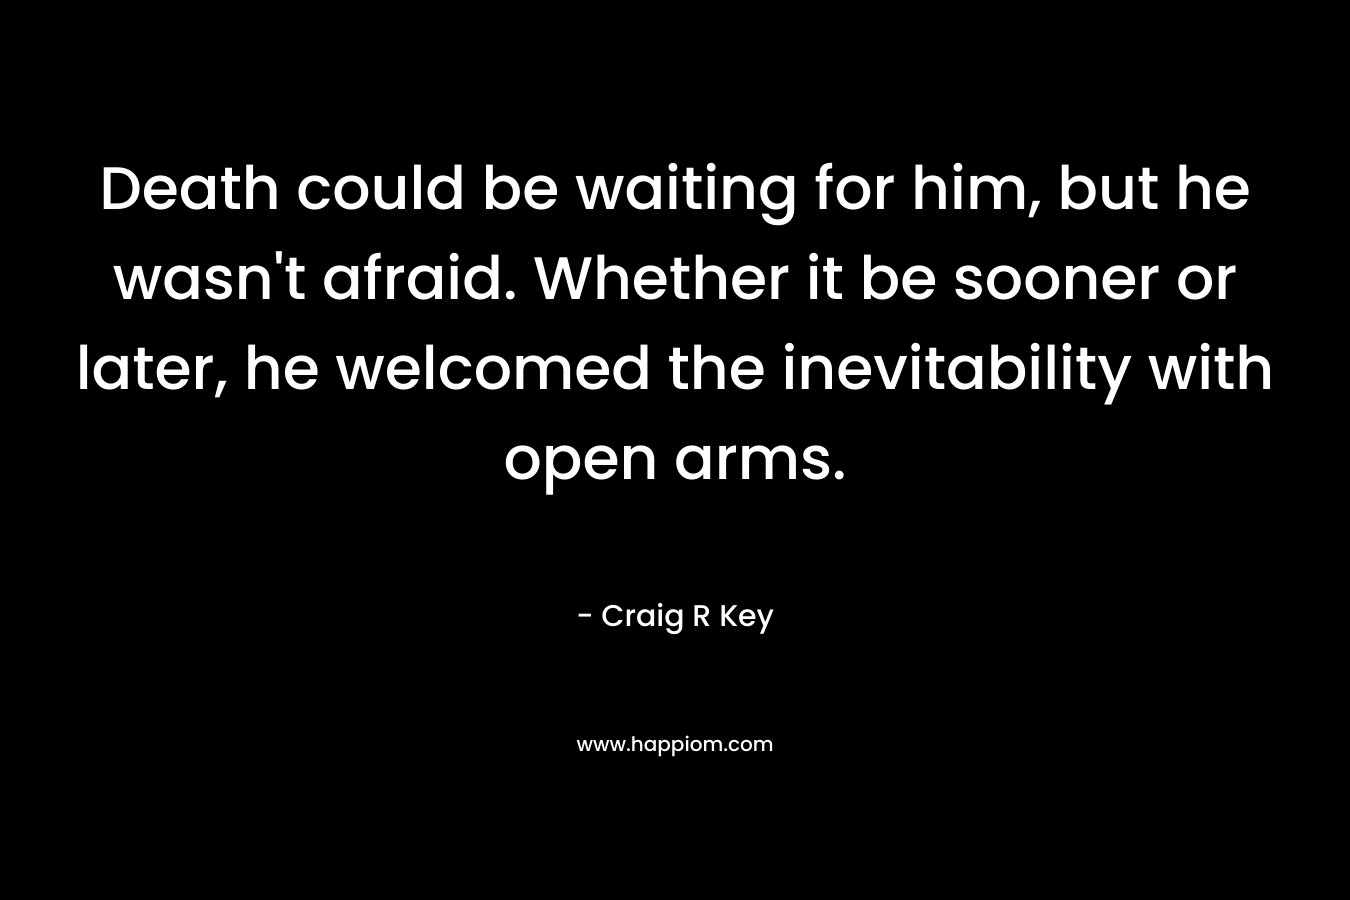 Death could be waiting for him, but he wasn’t afraid. Whether it be sooner or later, he welcomed the inevitability with open arms. – Craig R Key